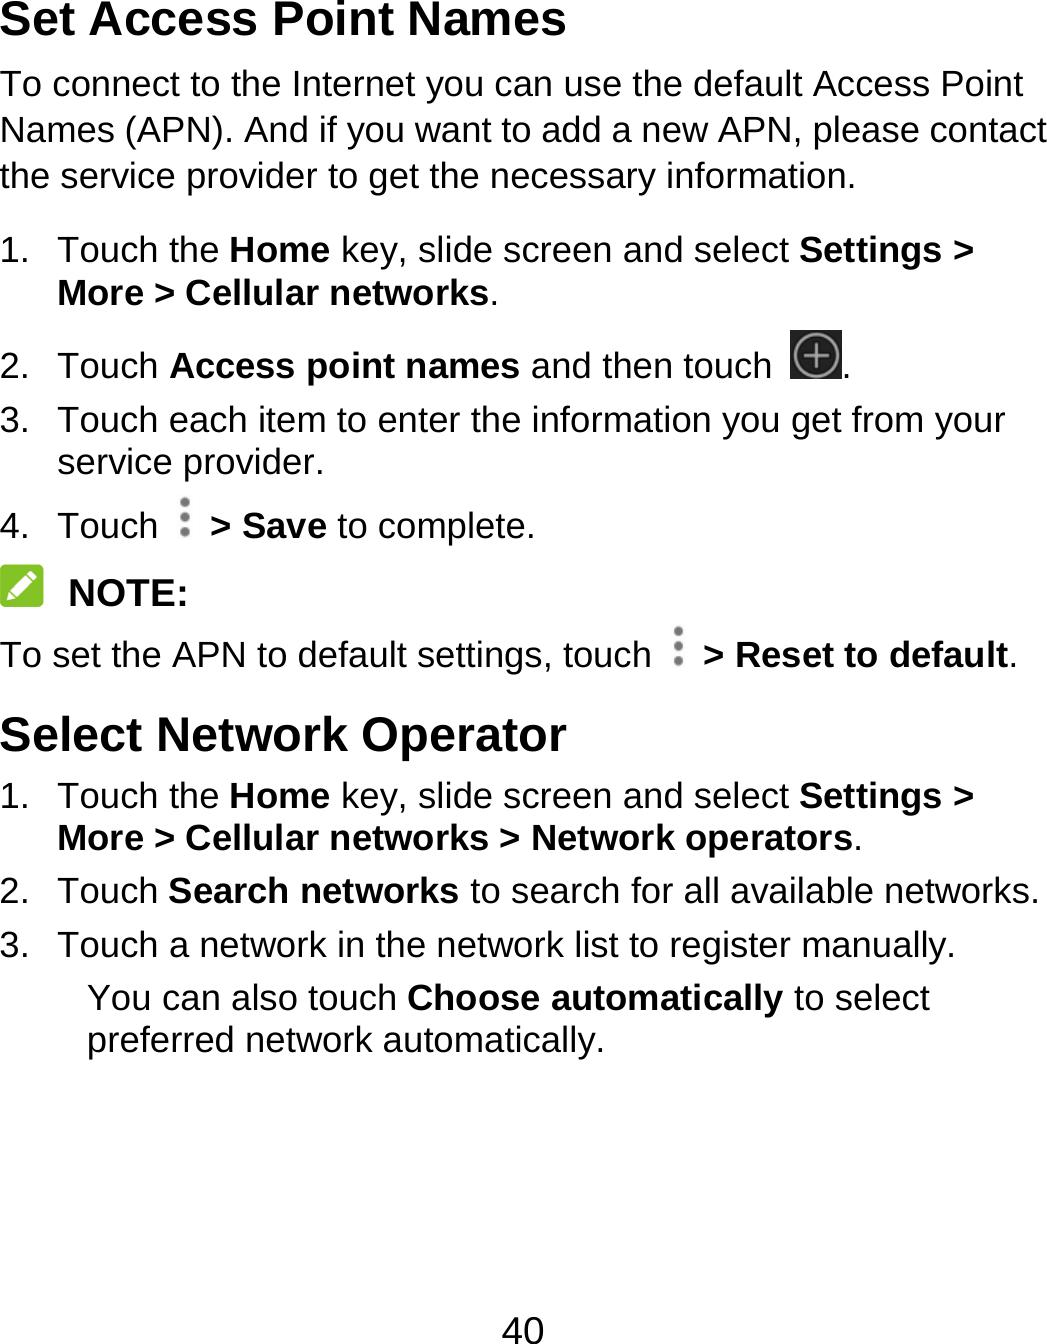 40 Set Access Point Names To connect to the Internet you can use the default Access Point Names (APN). And if you want to add a new APN, please contact the service provider to get the necessary information. 1. Touch the Home key, slide screen and select Settings &gt; More &gt; Cellular networks. 2. Touch Access point names and then touch  . 3.  Touch each item to enter the information you get from your service provider. 4. Touch  &gt; Save to complete.  NOTE: To set the APN to default settings, touch    &gt; Reset to default. Select Network Operator 1. Touch the Home key, slide screen and select Settings &gt; More &gt; Cellular networks &gt; Network operators. 2. Touch Search networks to search for all available networks. 3.  Touch a network in the network list to register manually. You can also touch Choose automatically to select preferred network automatically.  